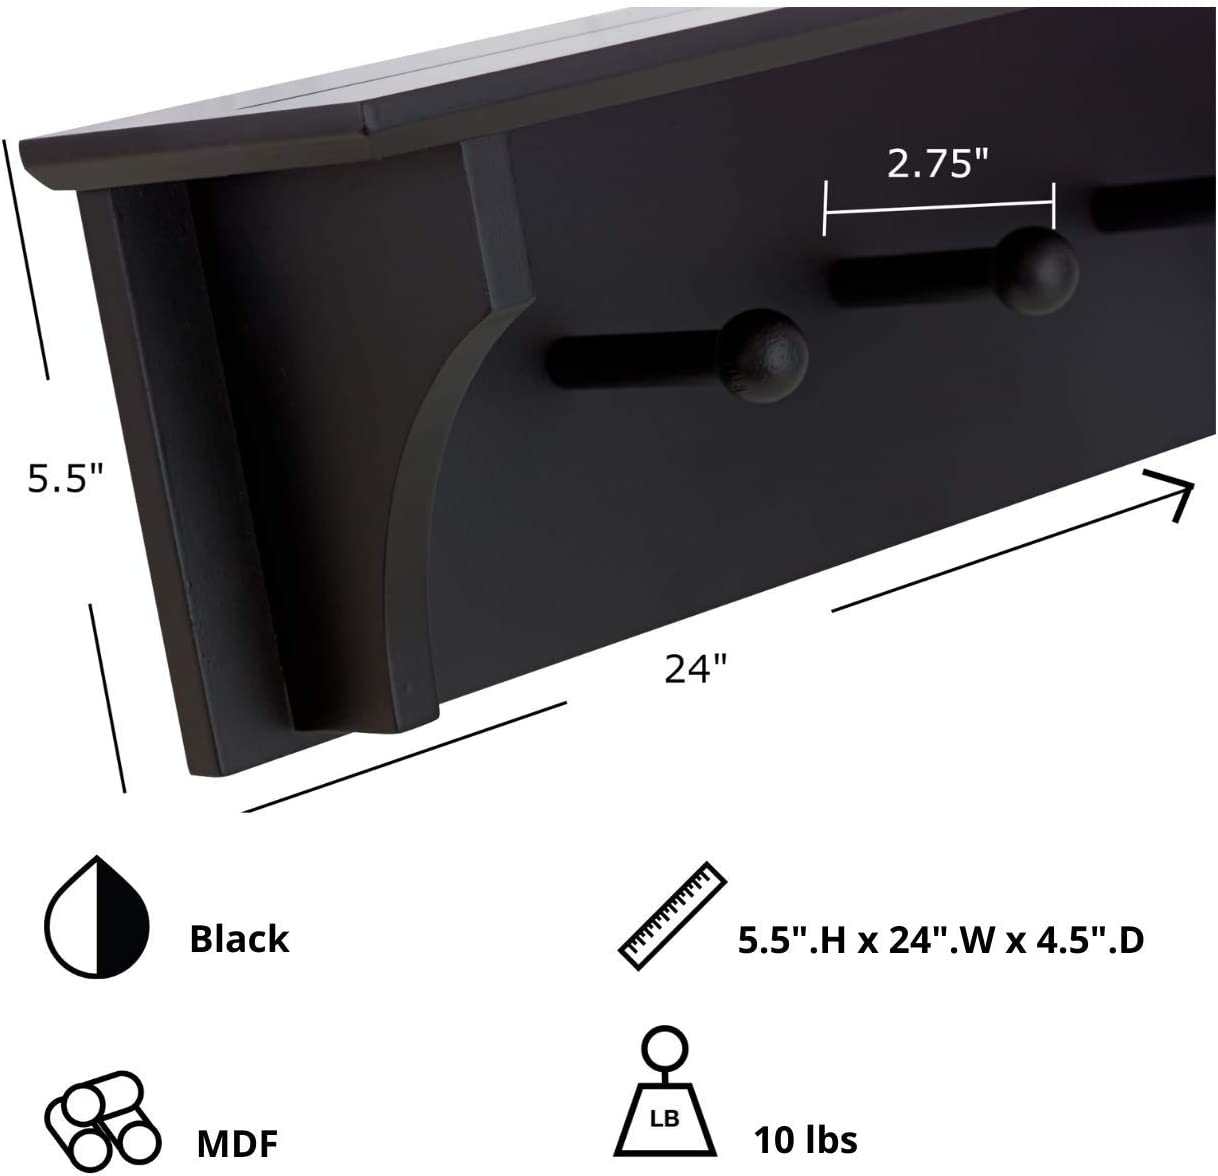 Generic Foster 24" Wall Shelf With 5 Pegs - image 2 of 7